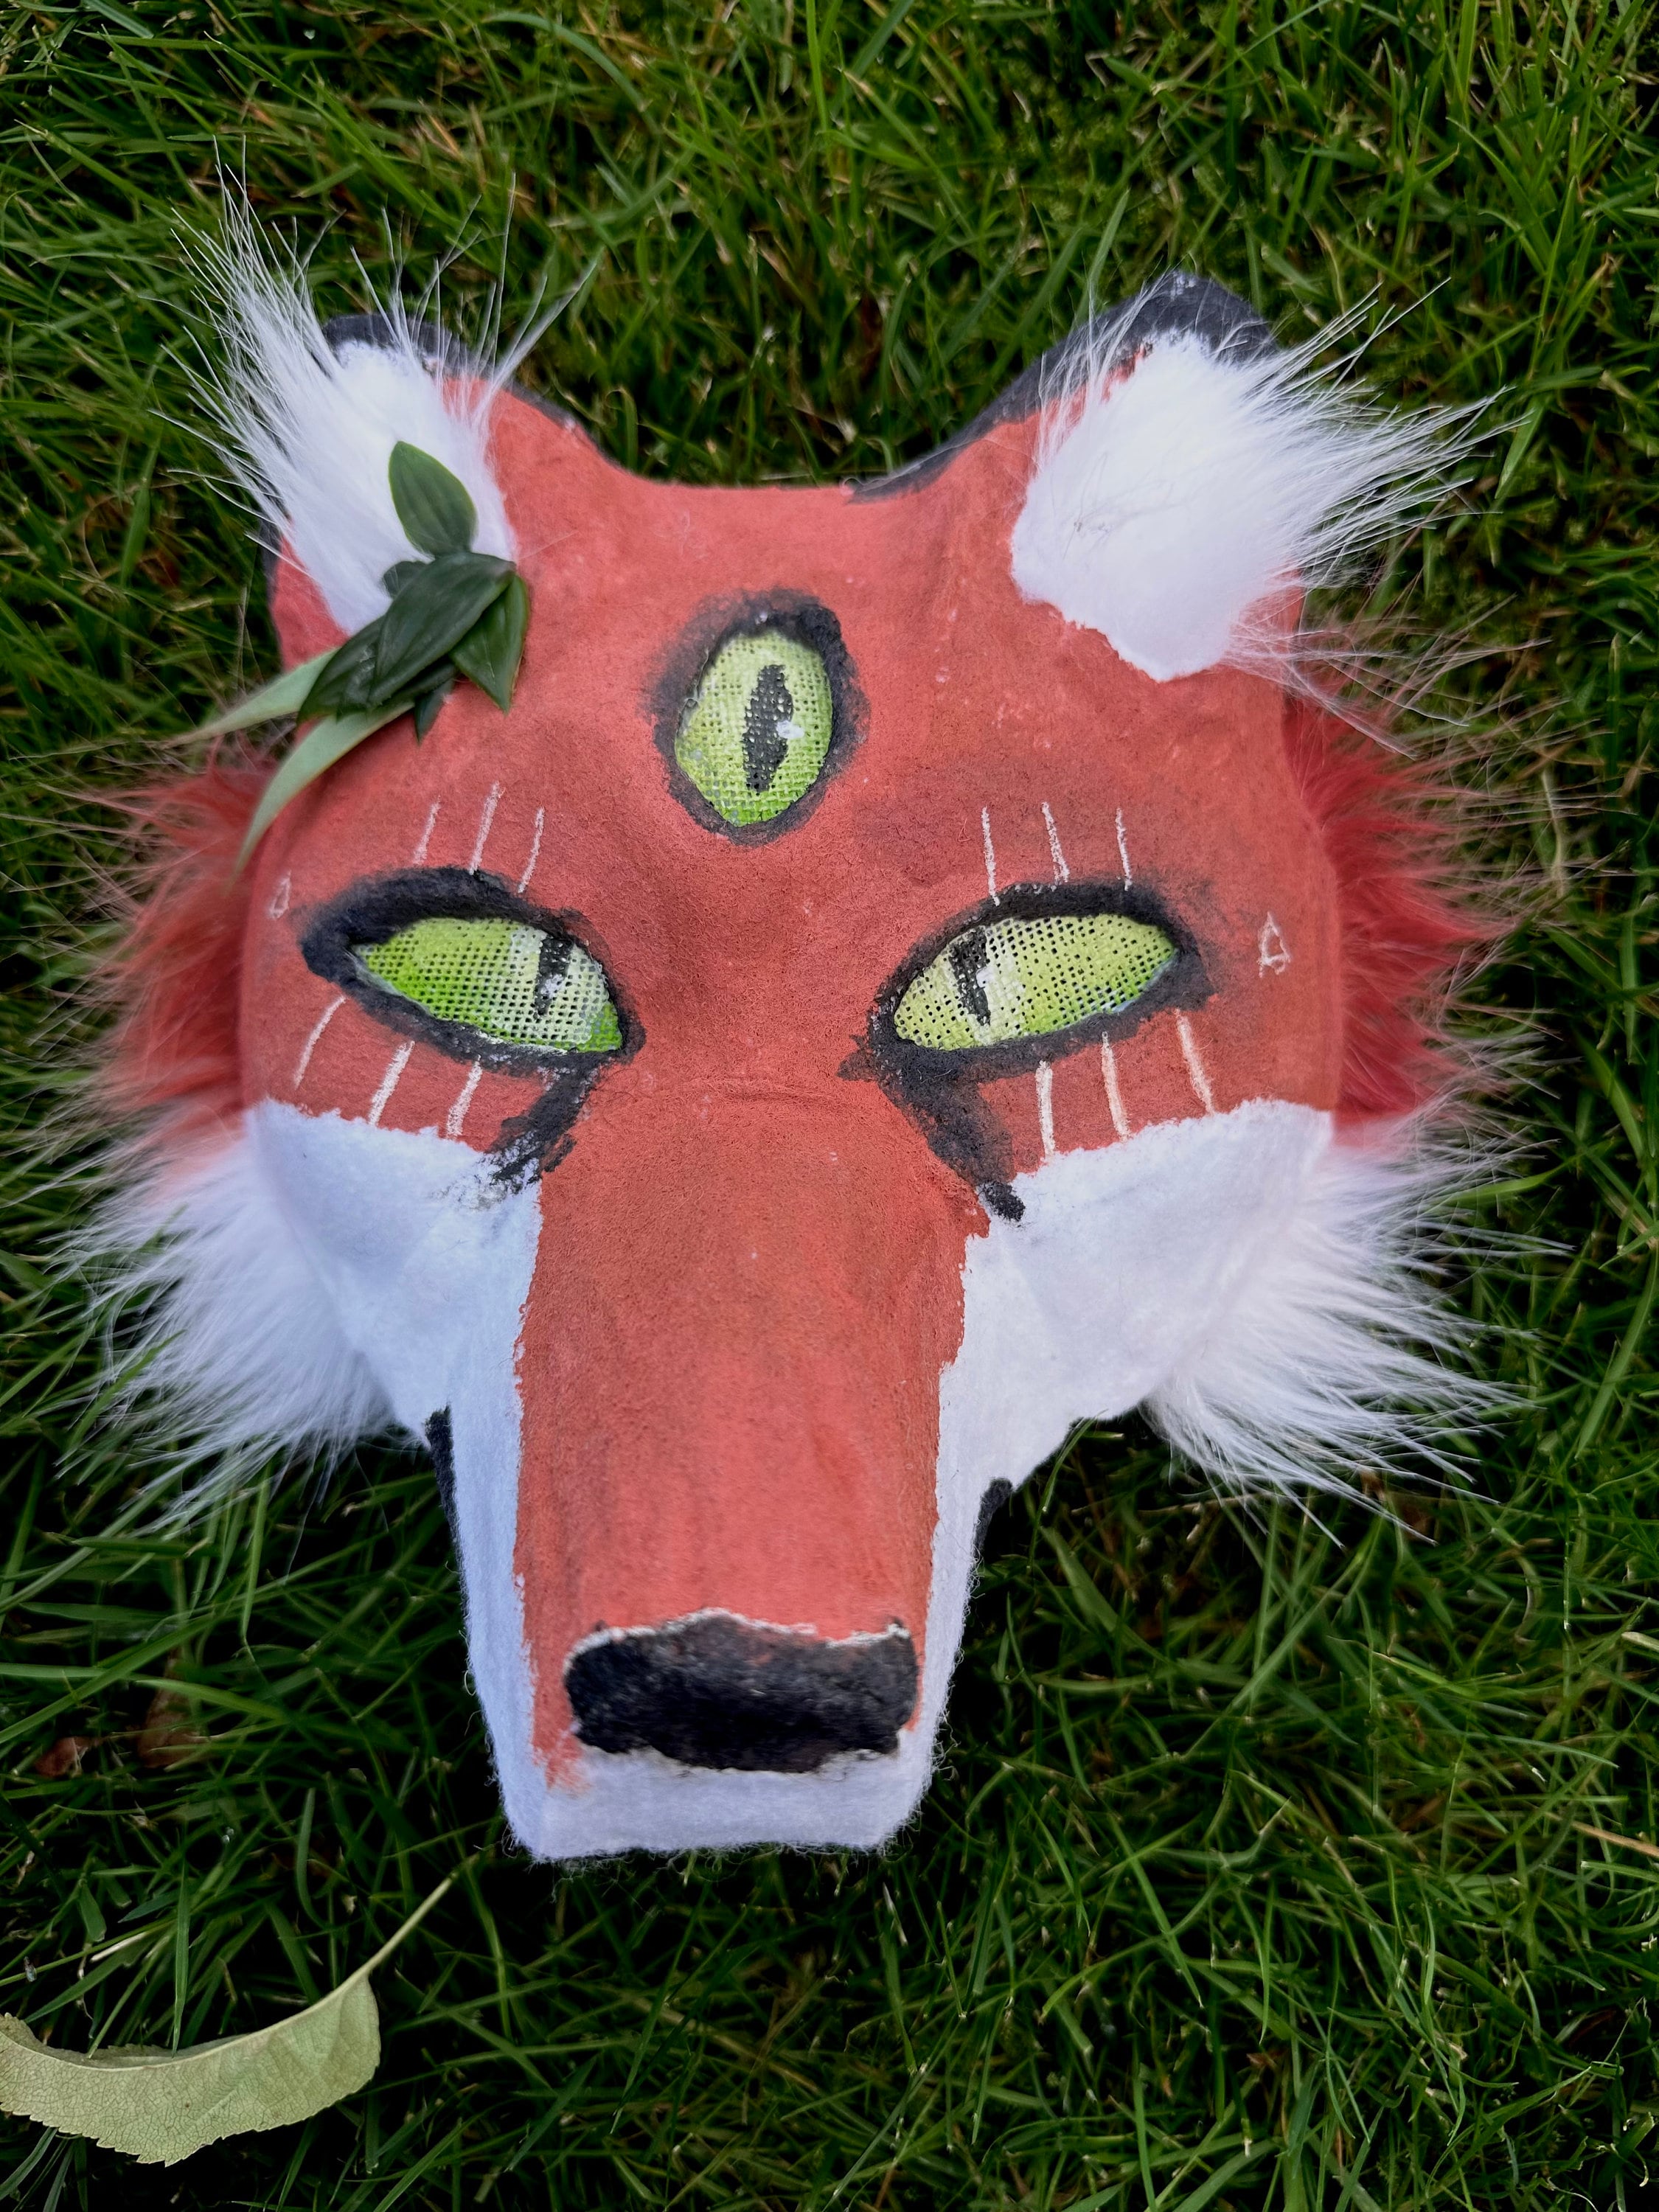 Therian Mask Wolf Halloween Costume for Men Scary Animal Furry